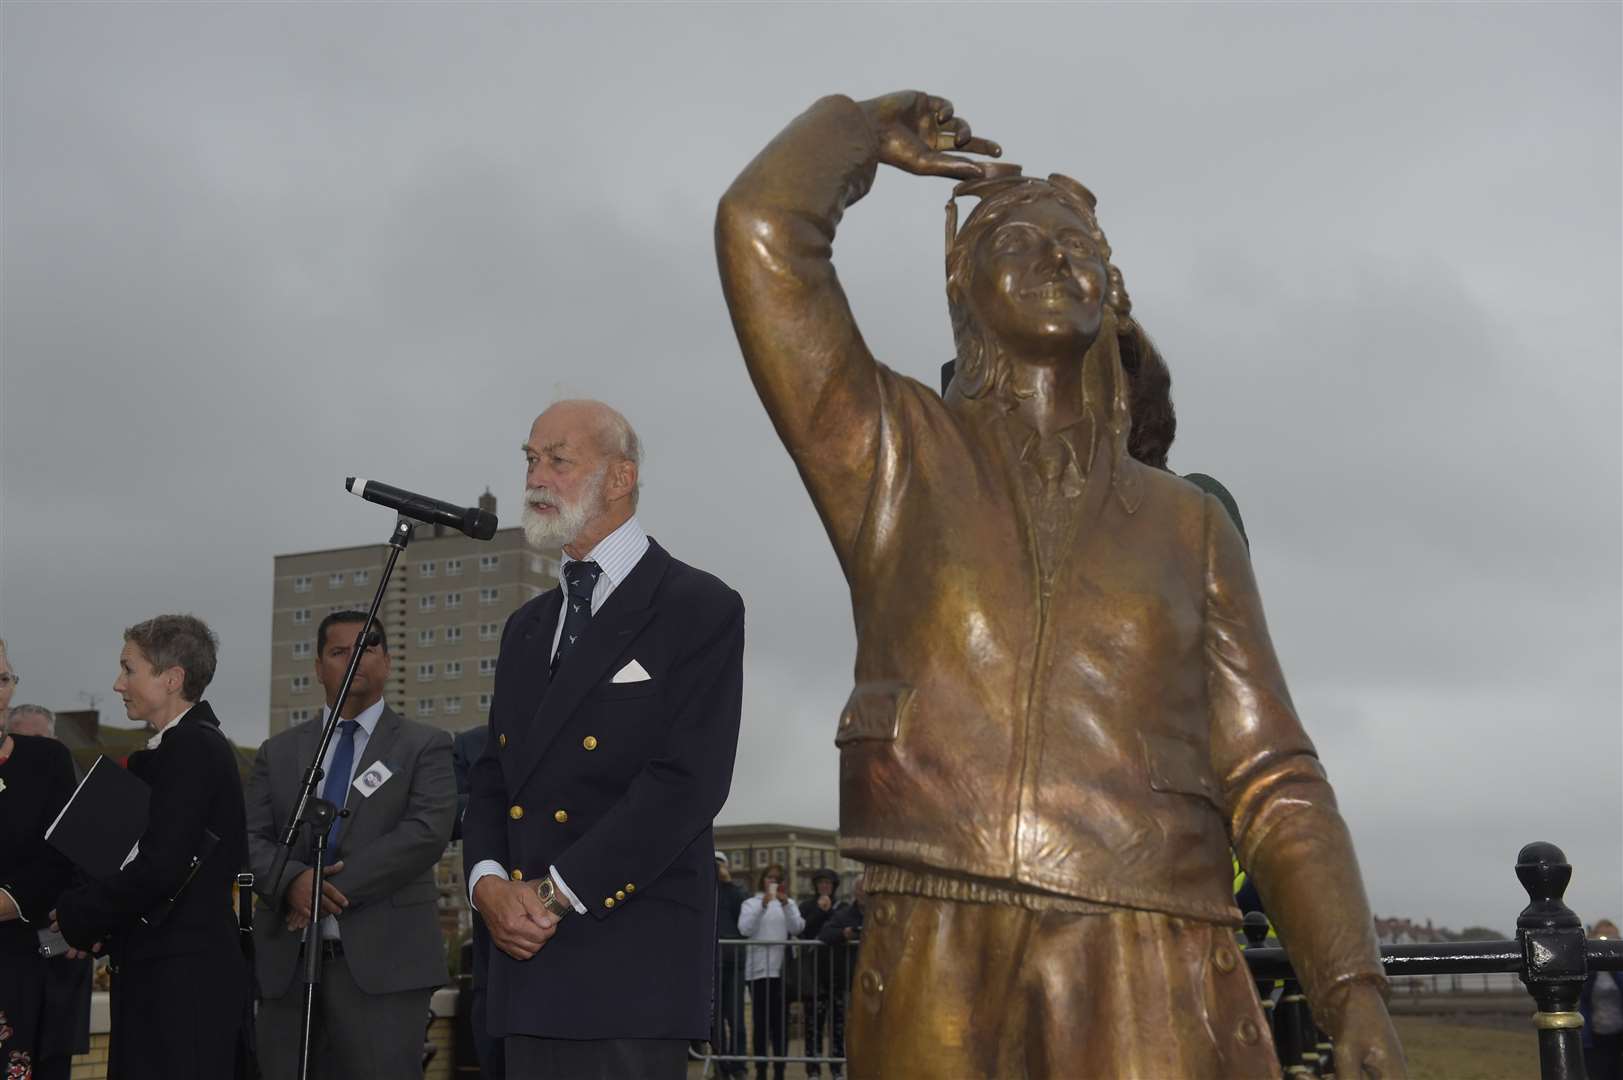 Prince Michael of Kent unveils the Amy Johnson statue in Herne Bay in 2016